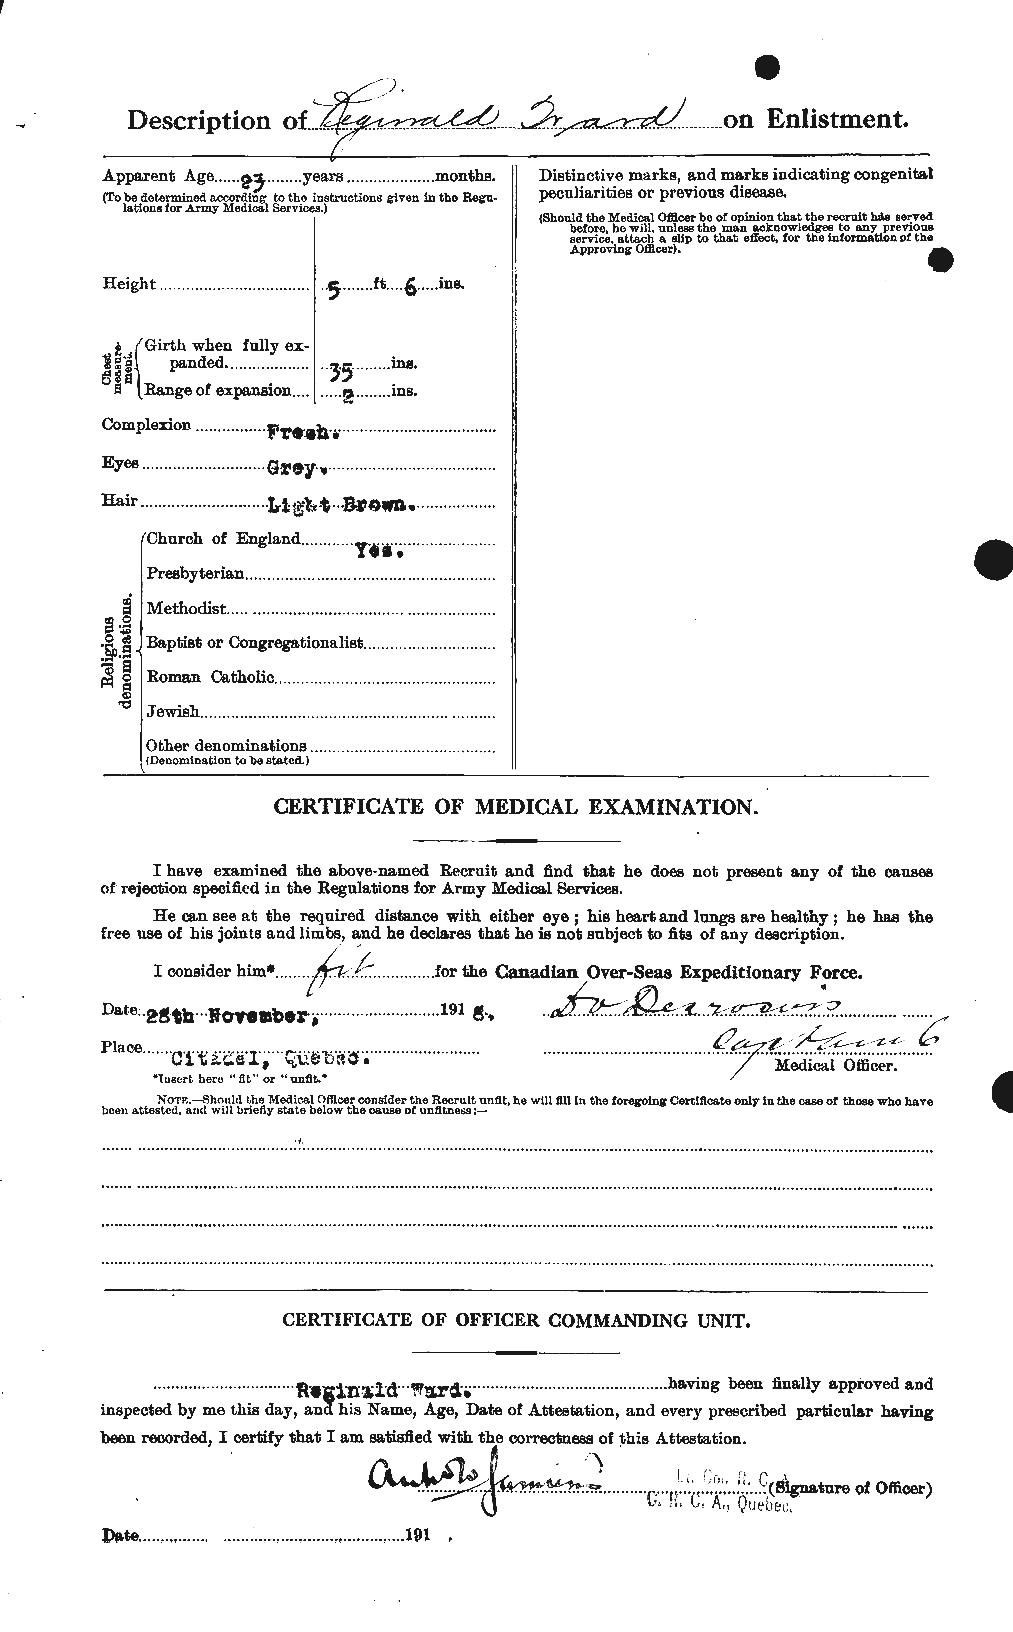 Personnel Records of the First World War - CEF 659641b